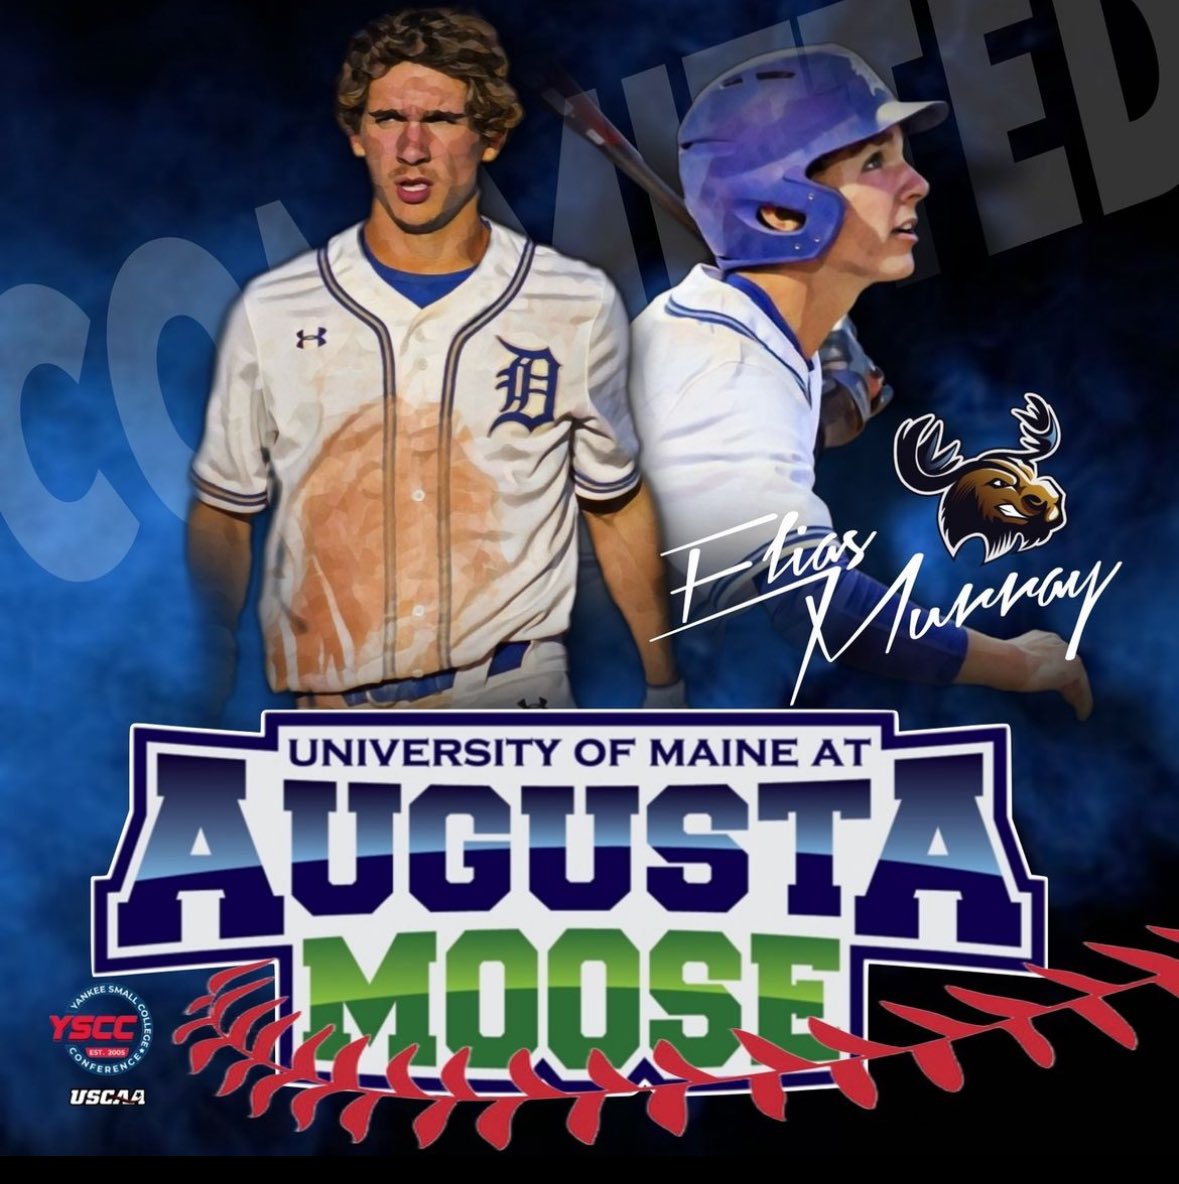 Congratulations to @DobsonFootball player Elias Murray on committing to @UMAugusta to play baseball.  They are getting an incredible athlete and even better athlete and young man!   So proud of him!  #BRICKxBRICK #UC. @DobsonAthletics @DobsonHigh